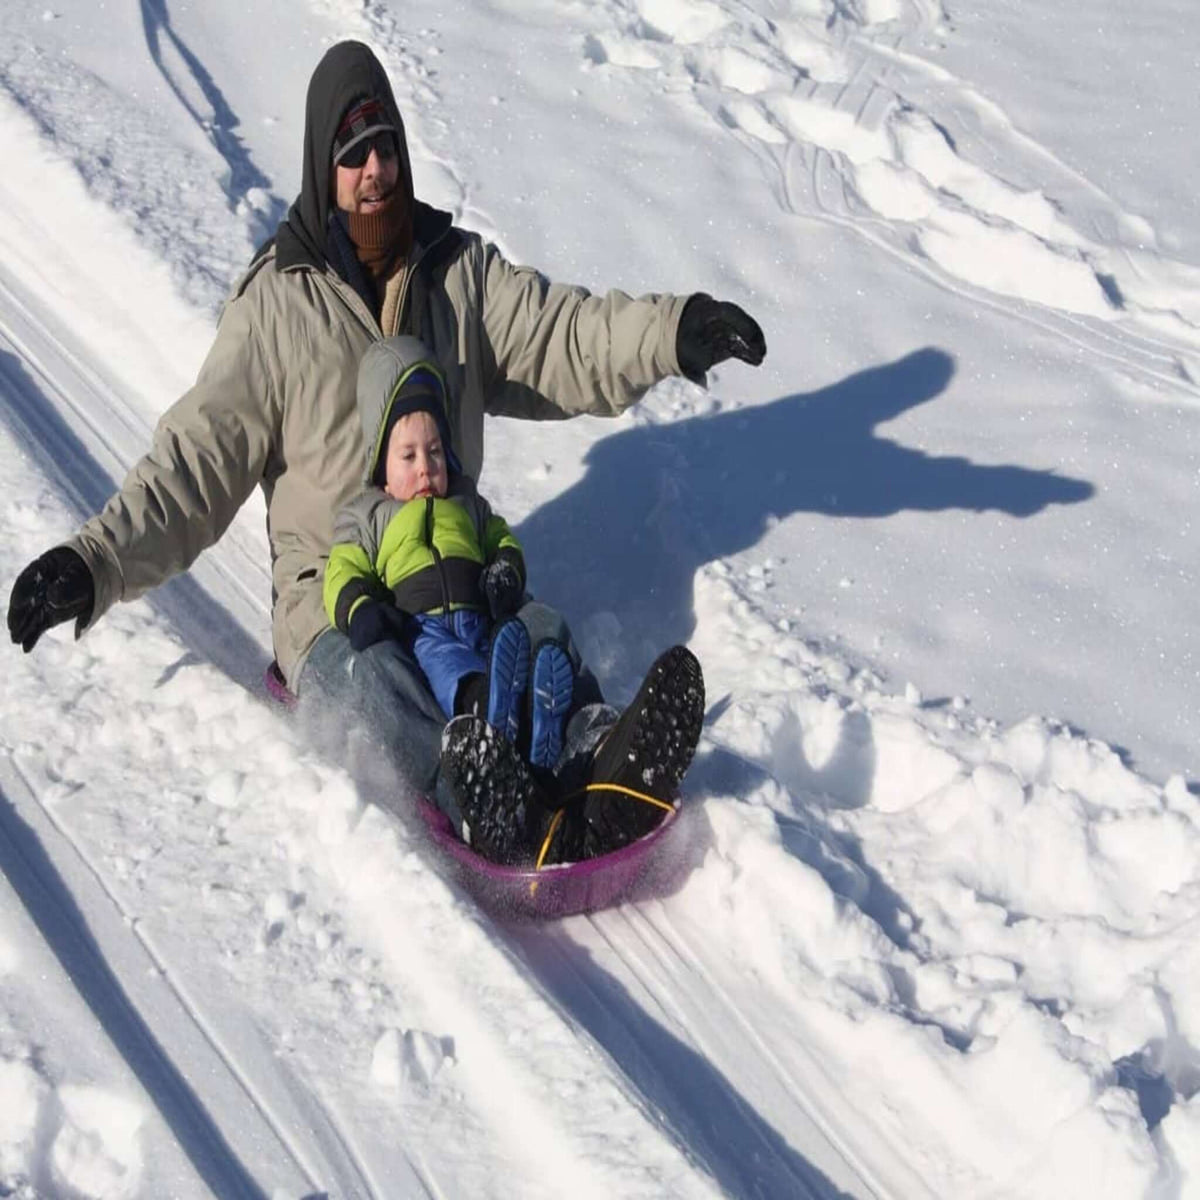 Man and child on snow sledge going down hill - showing a better life after beating burnout